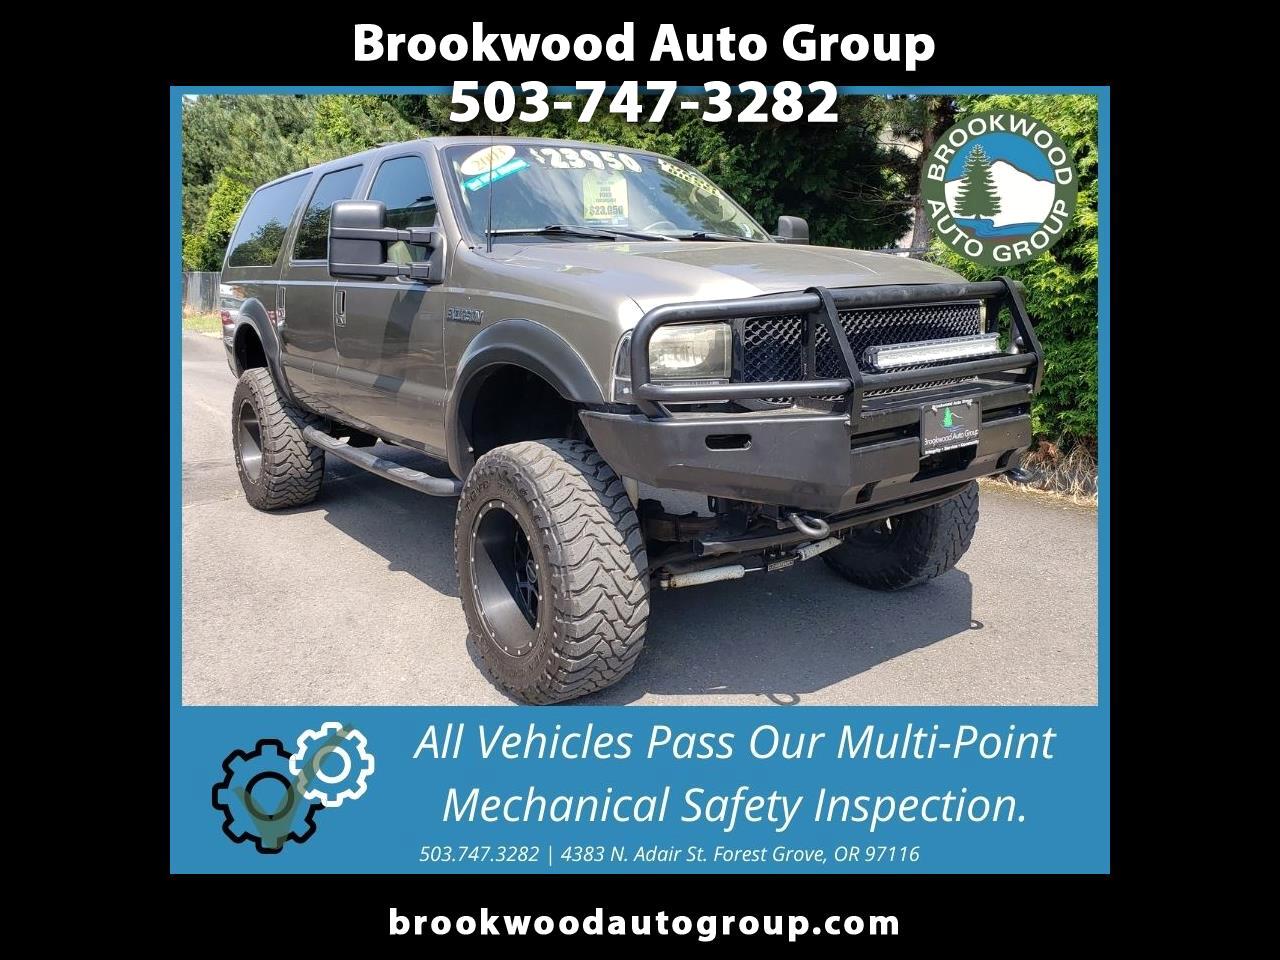 Ford Excursion 137" WB 6.0L Limited 4WD 2003